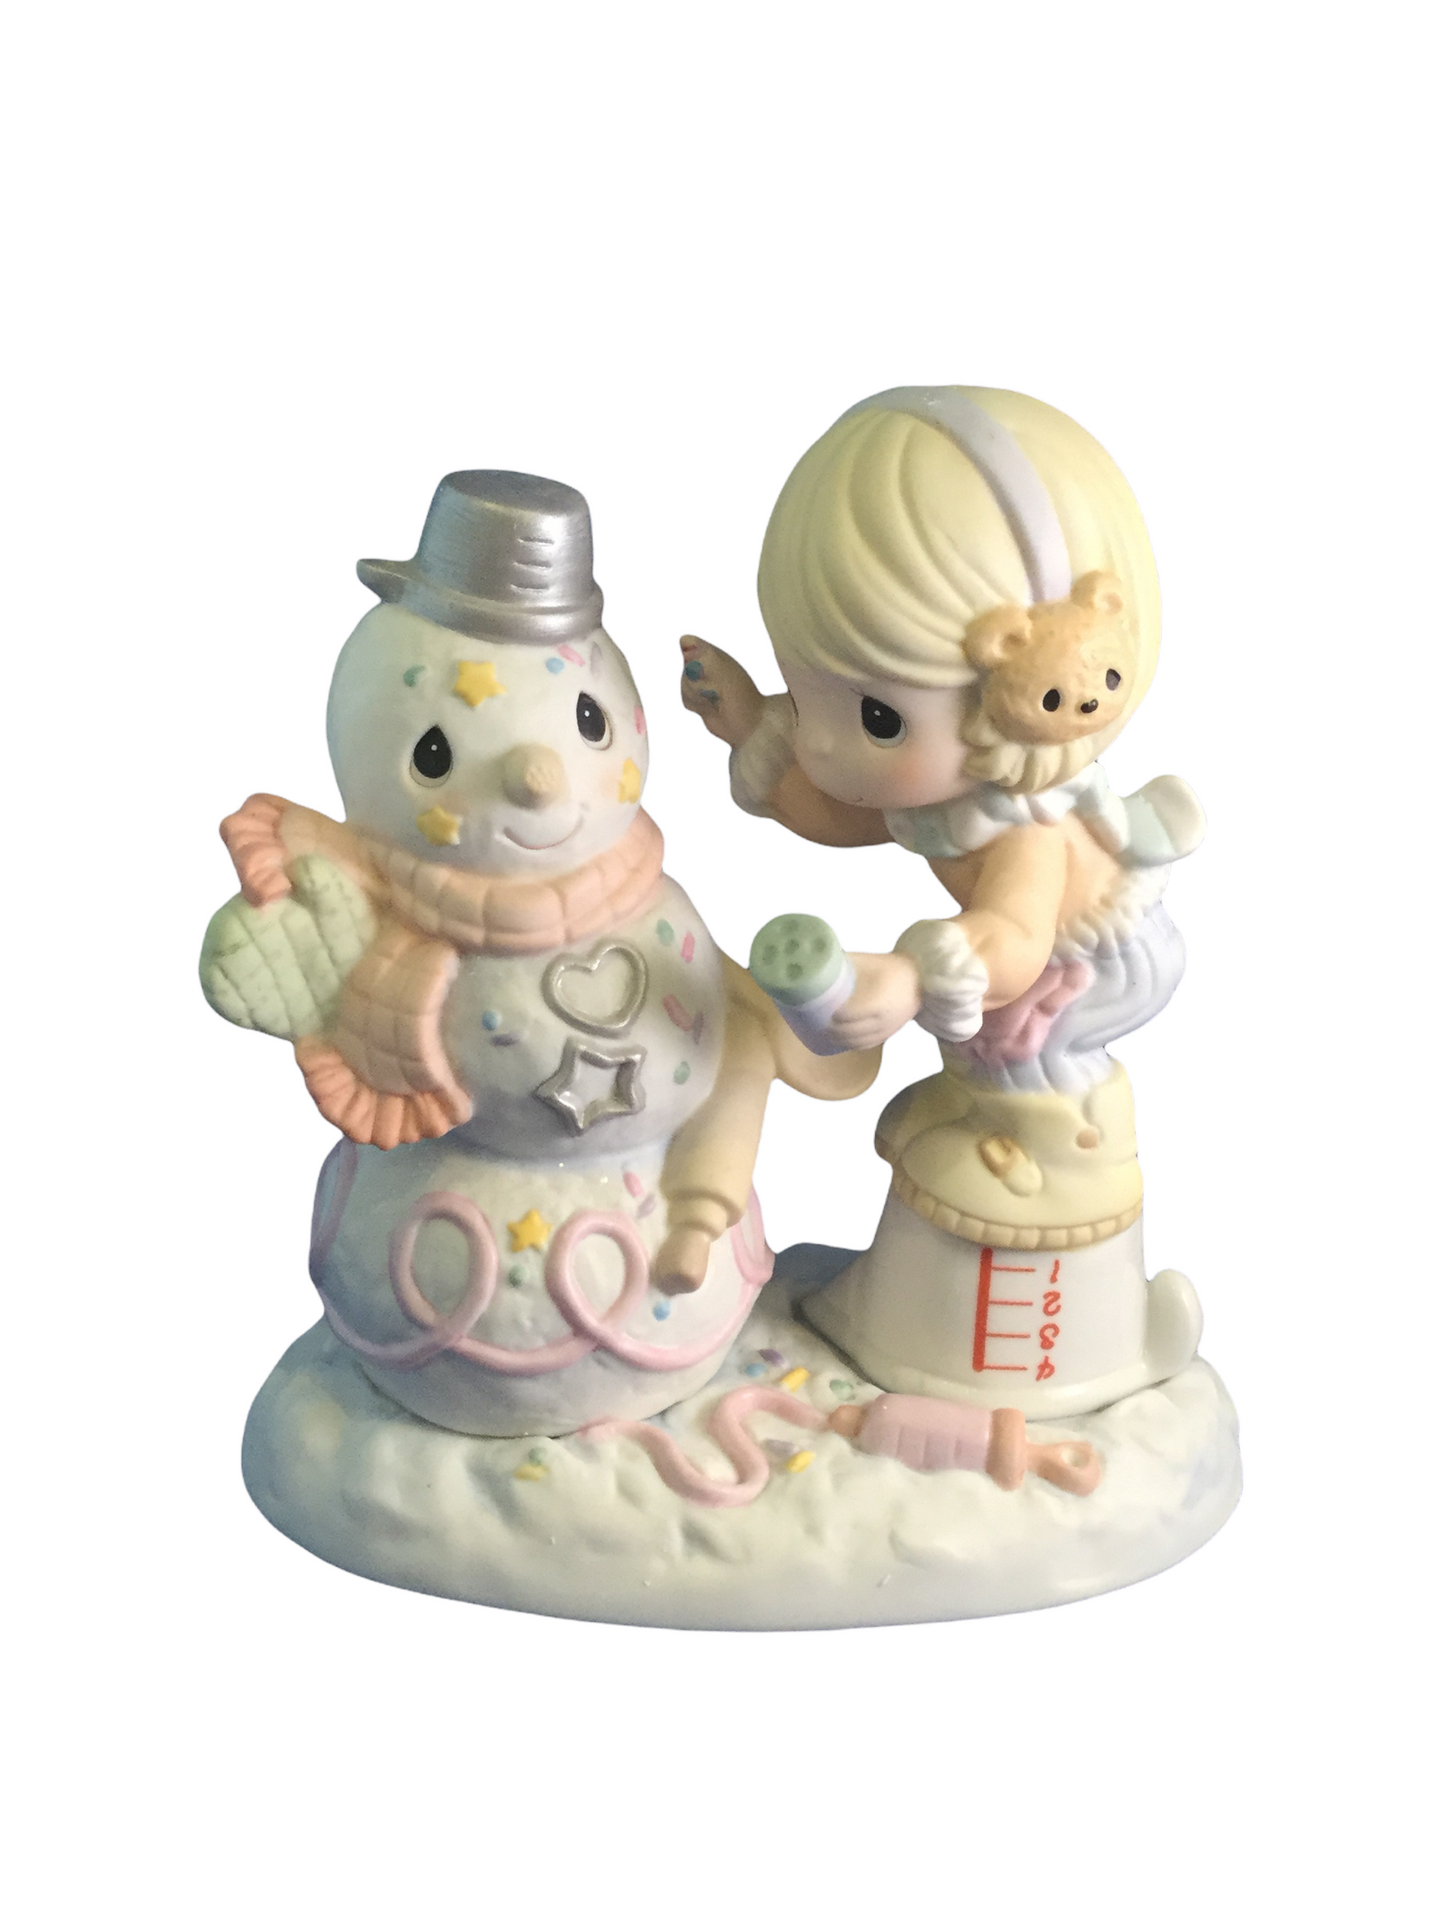 Sprinkled In Sweetness - Precious Moment Figurine